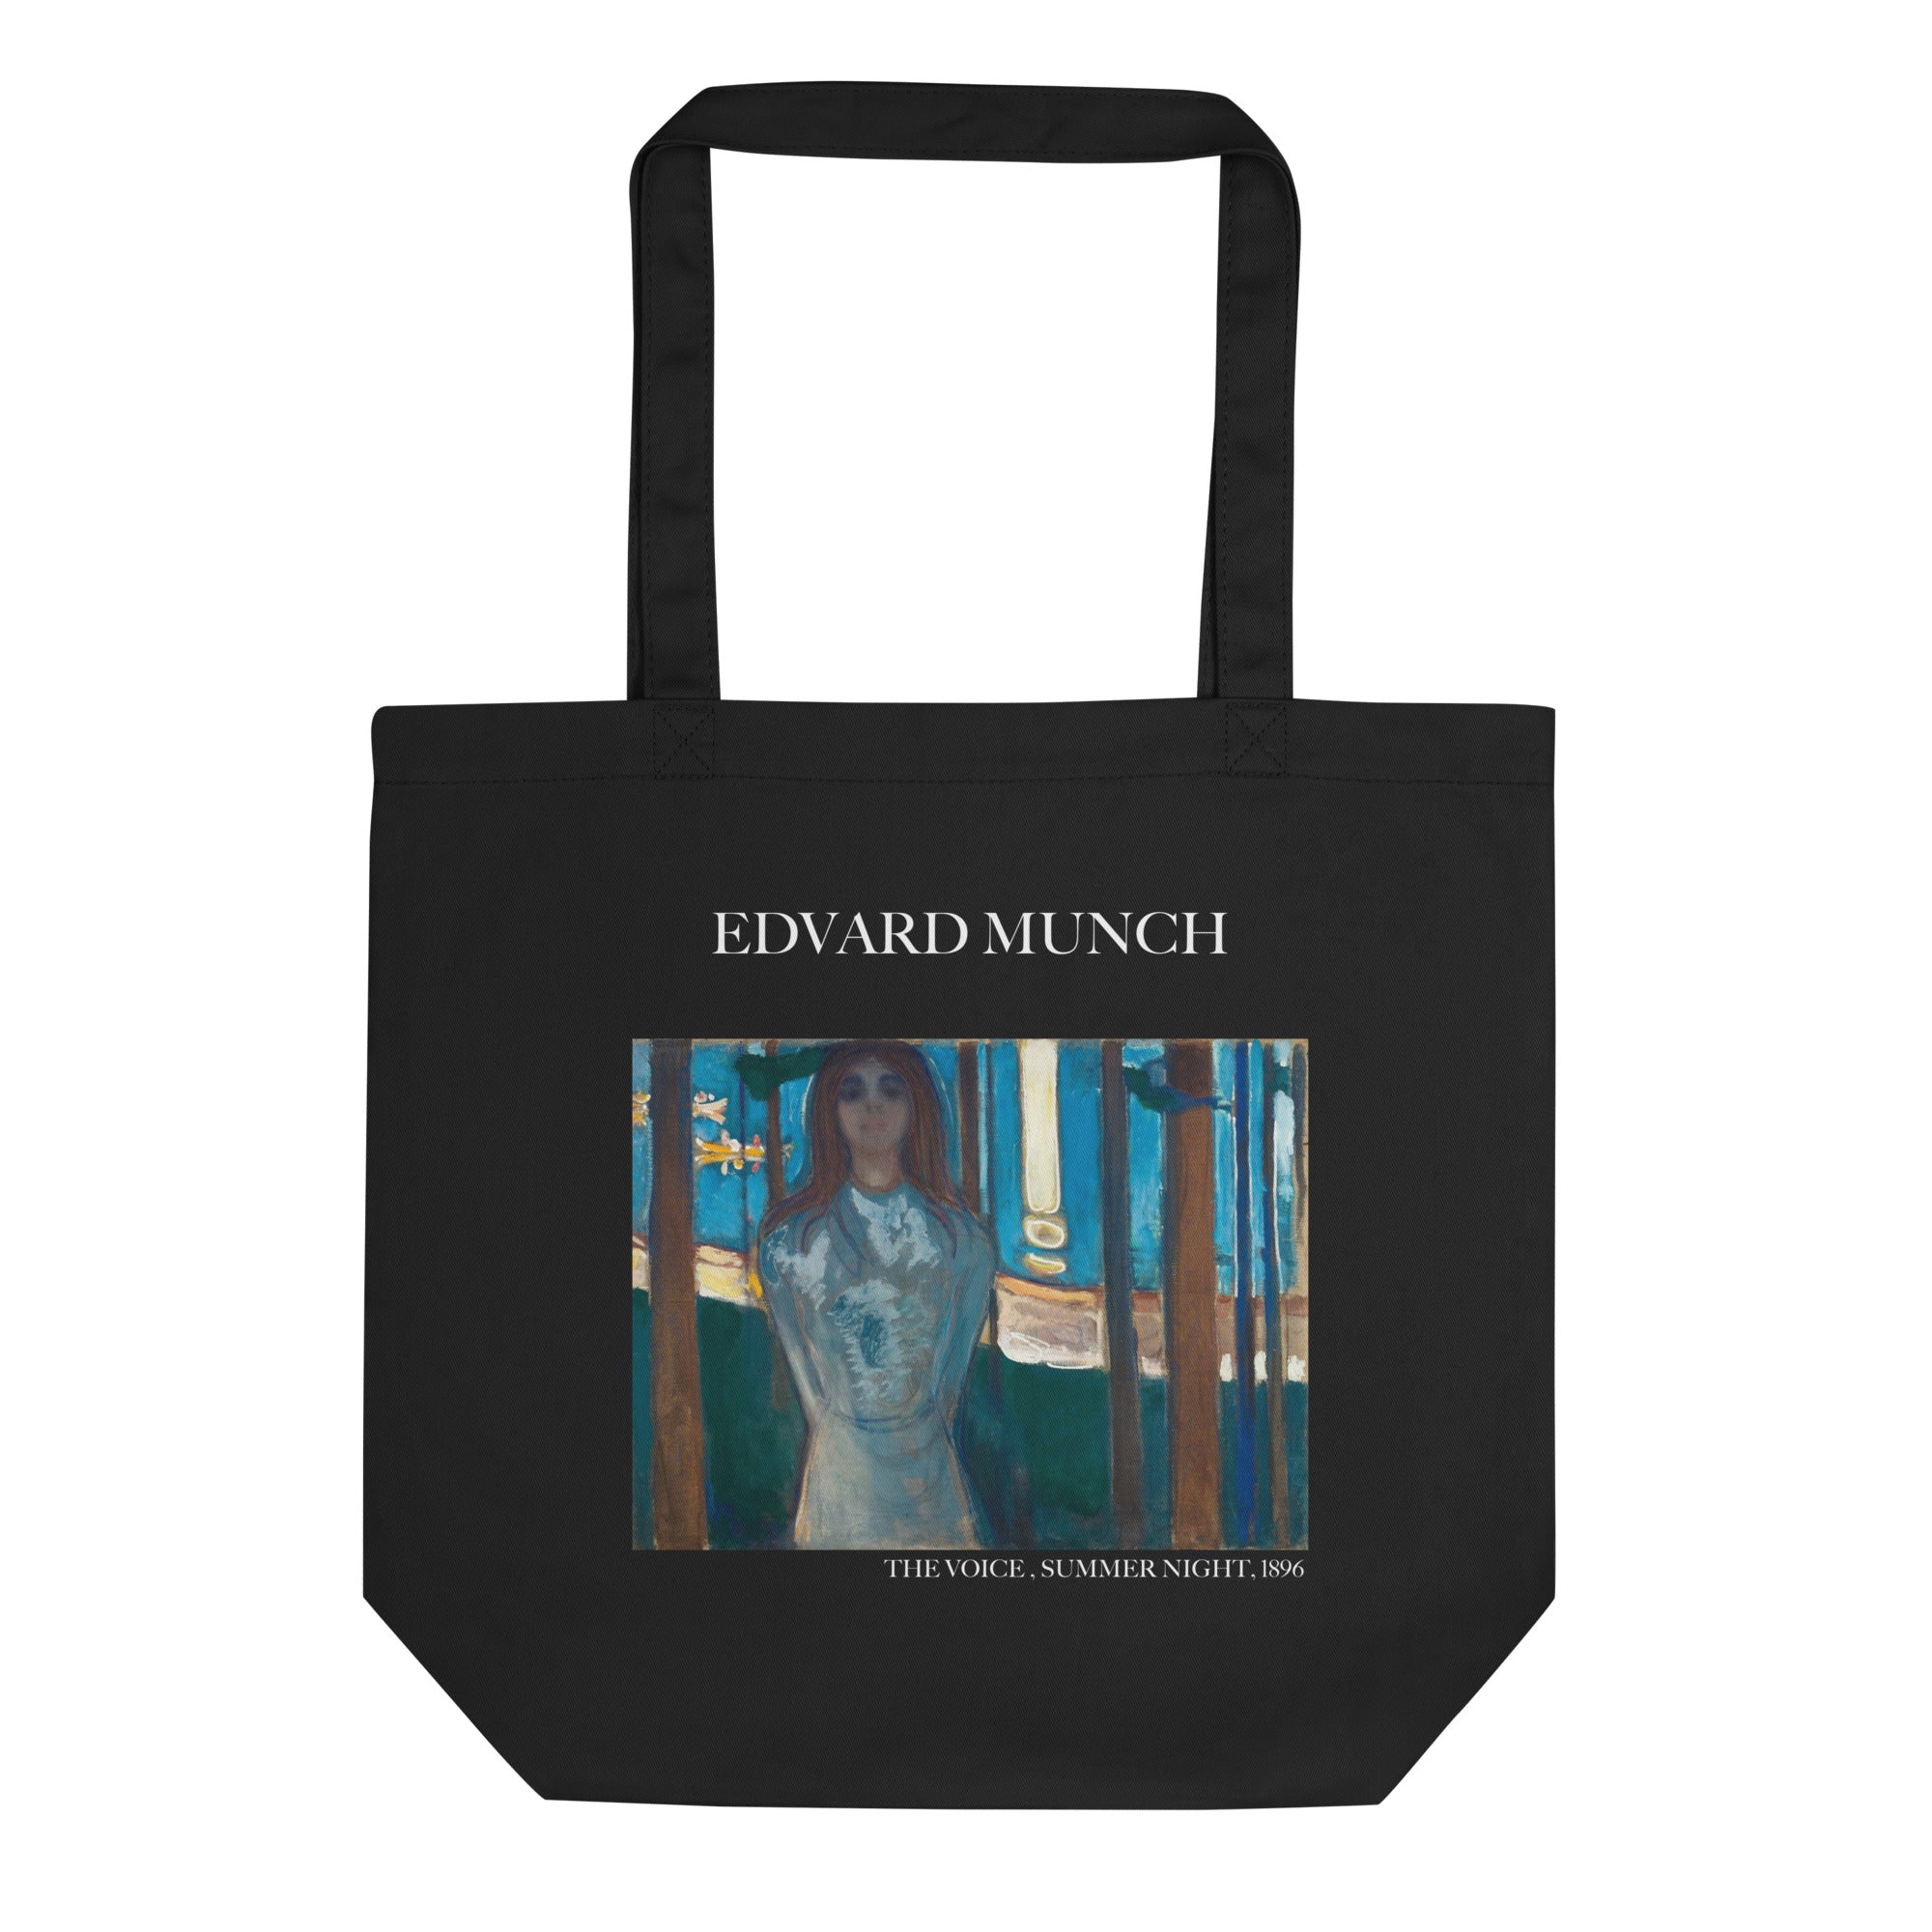 Edvard Munch 'The Voice, Summer Night' Famous Painting Totebag | Eco Friendly Art Tote Bag